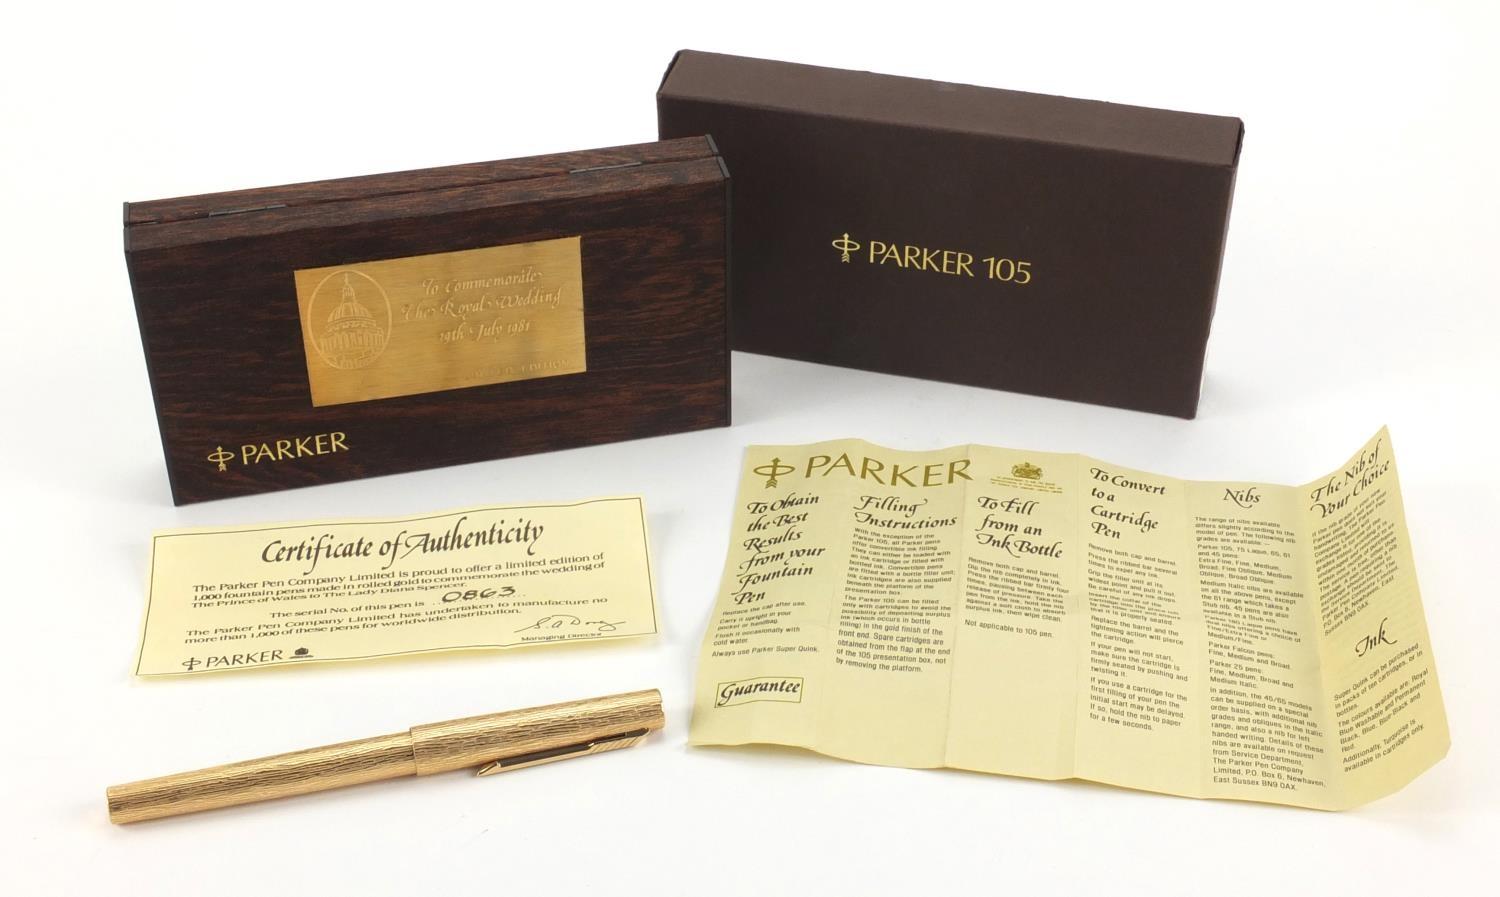 Limited edition rolled gold Parker 105 fountain pen, commemorating the wedding of The Prince of